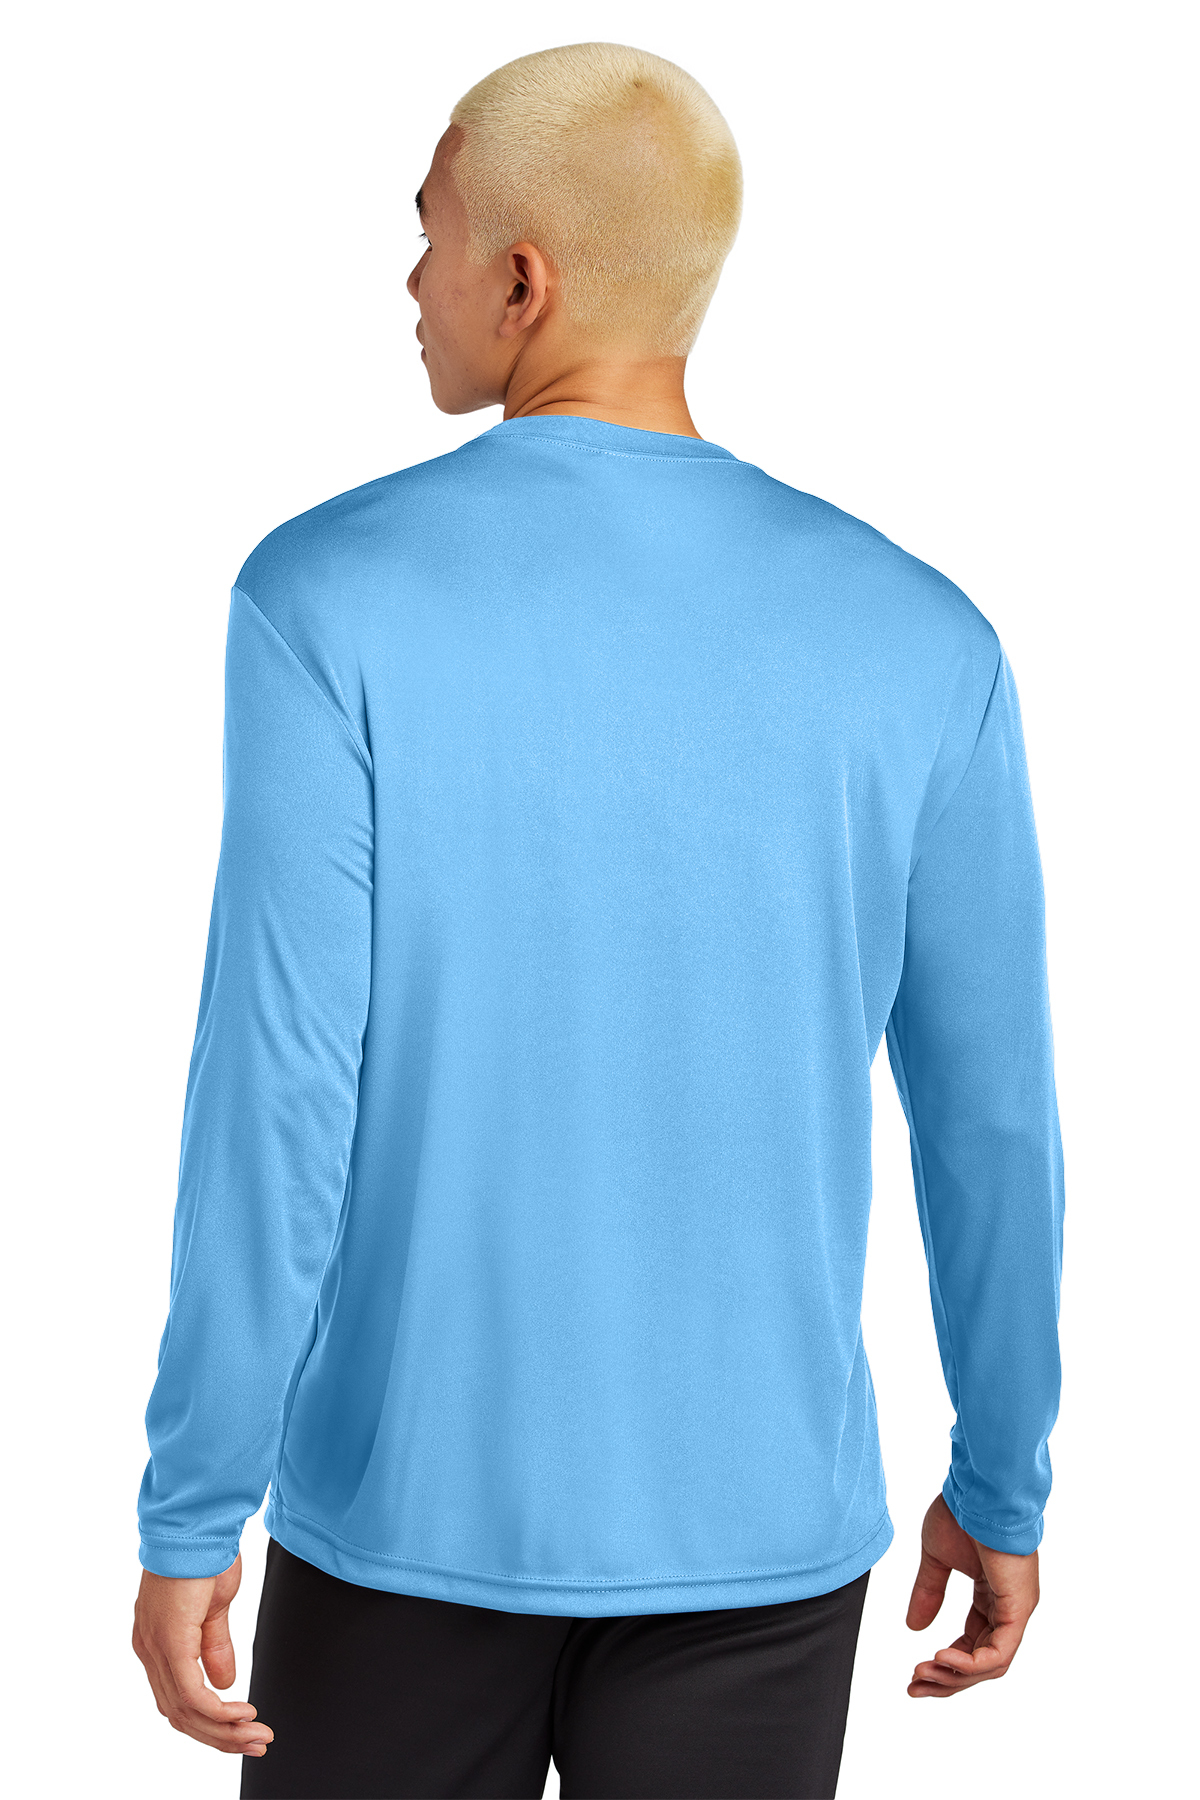 Sport-Tek Long Sleeve PosiCharge Competitor™ Tee | Product | Company ...